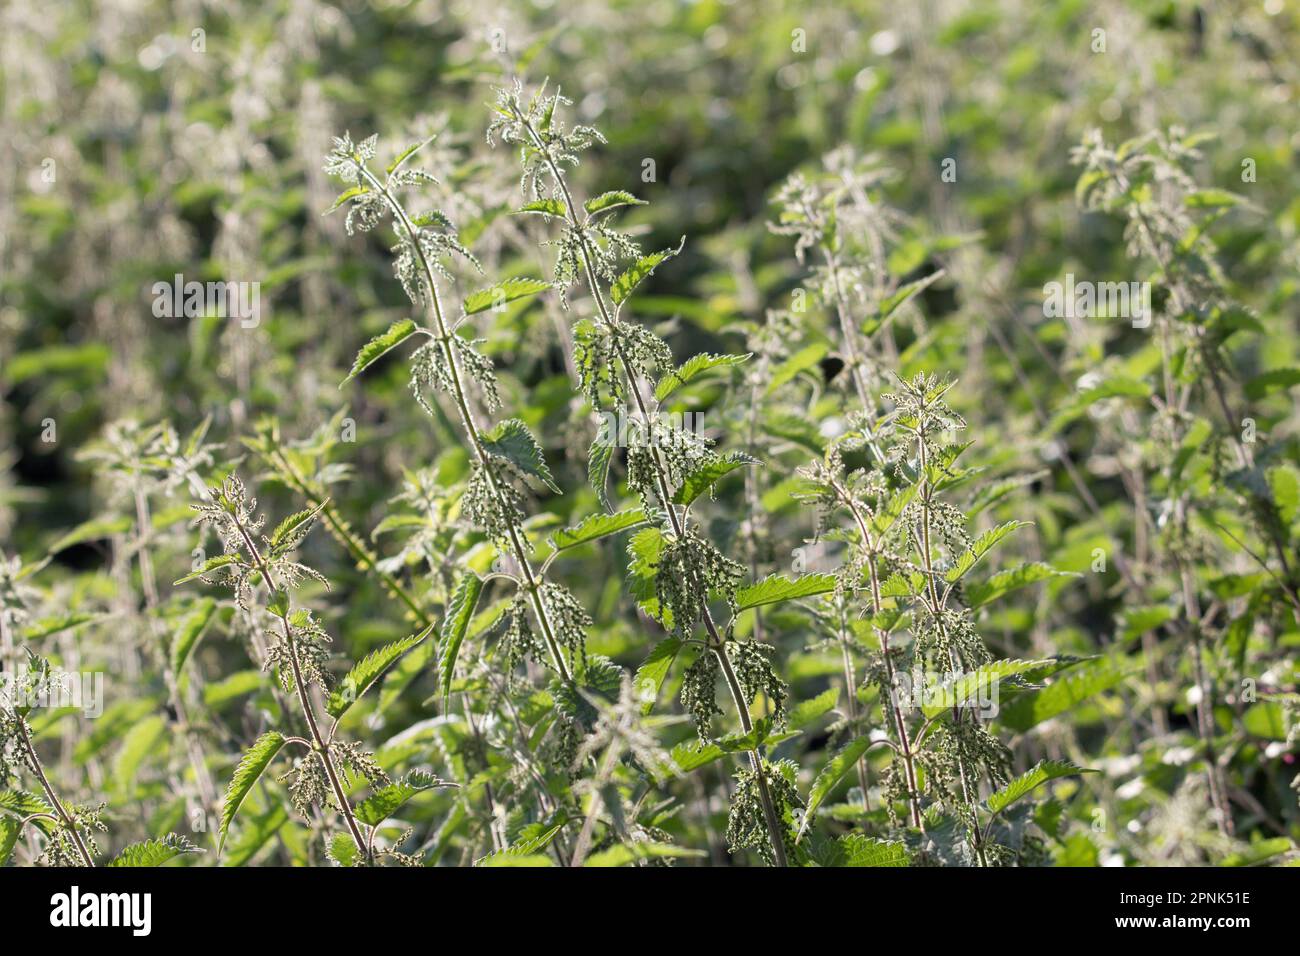 multiple common stinging nettle (Urtica dioica) isolated Stock Photo